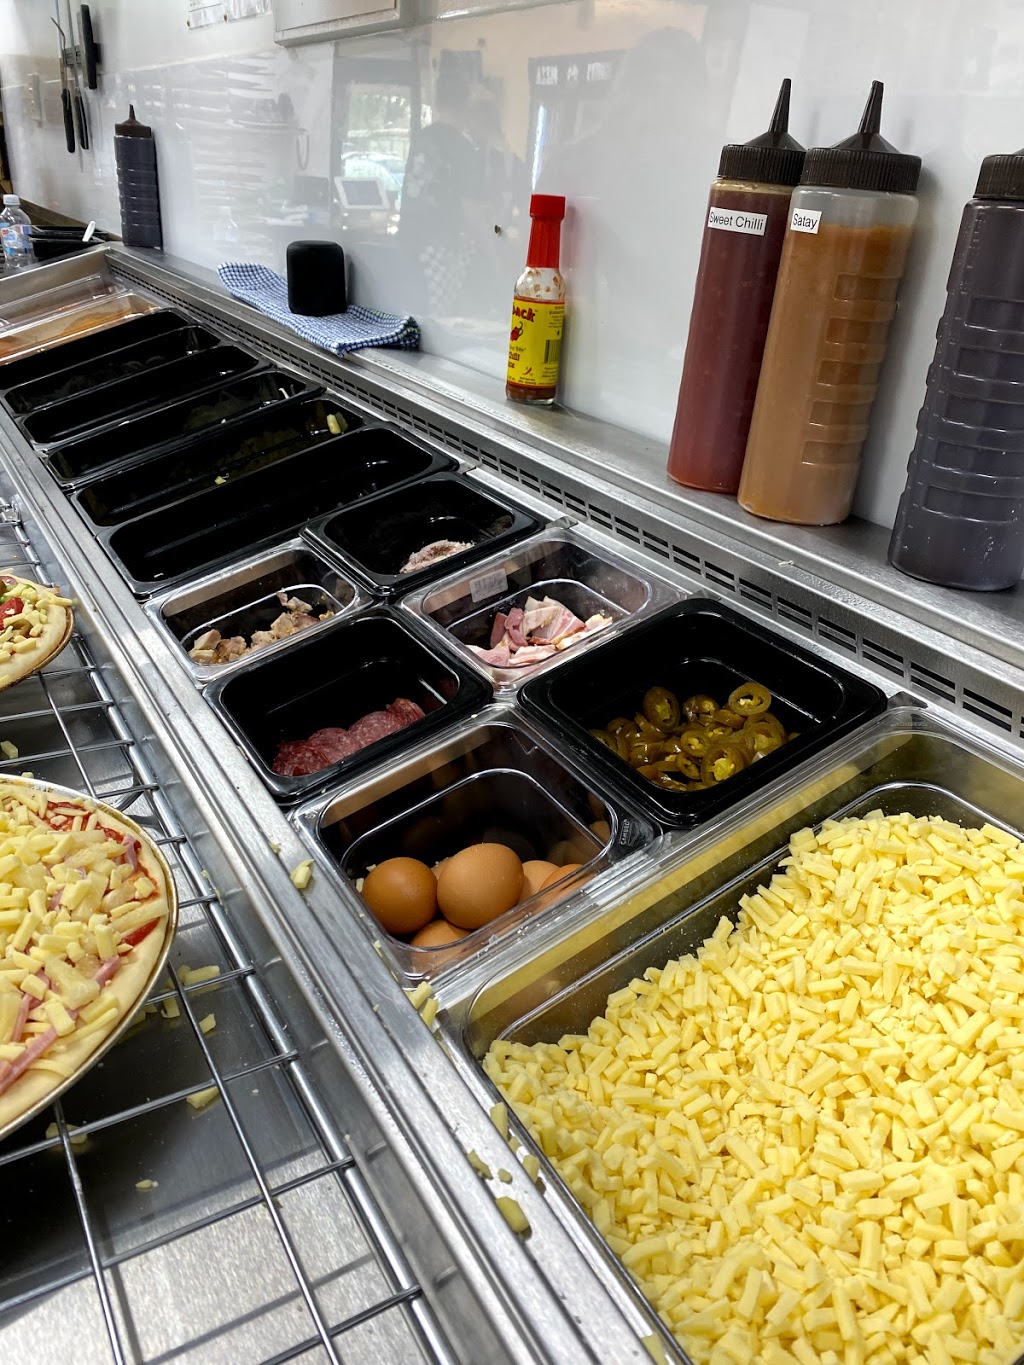 Scottys Pizza | meal takeaway | 15/63 St Andrews Dr, Tewantin QLD 4565, Australia | 0752319866 OR +61 7 5231 9866